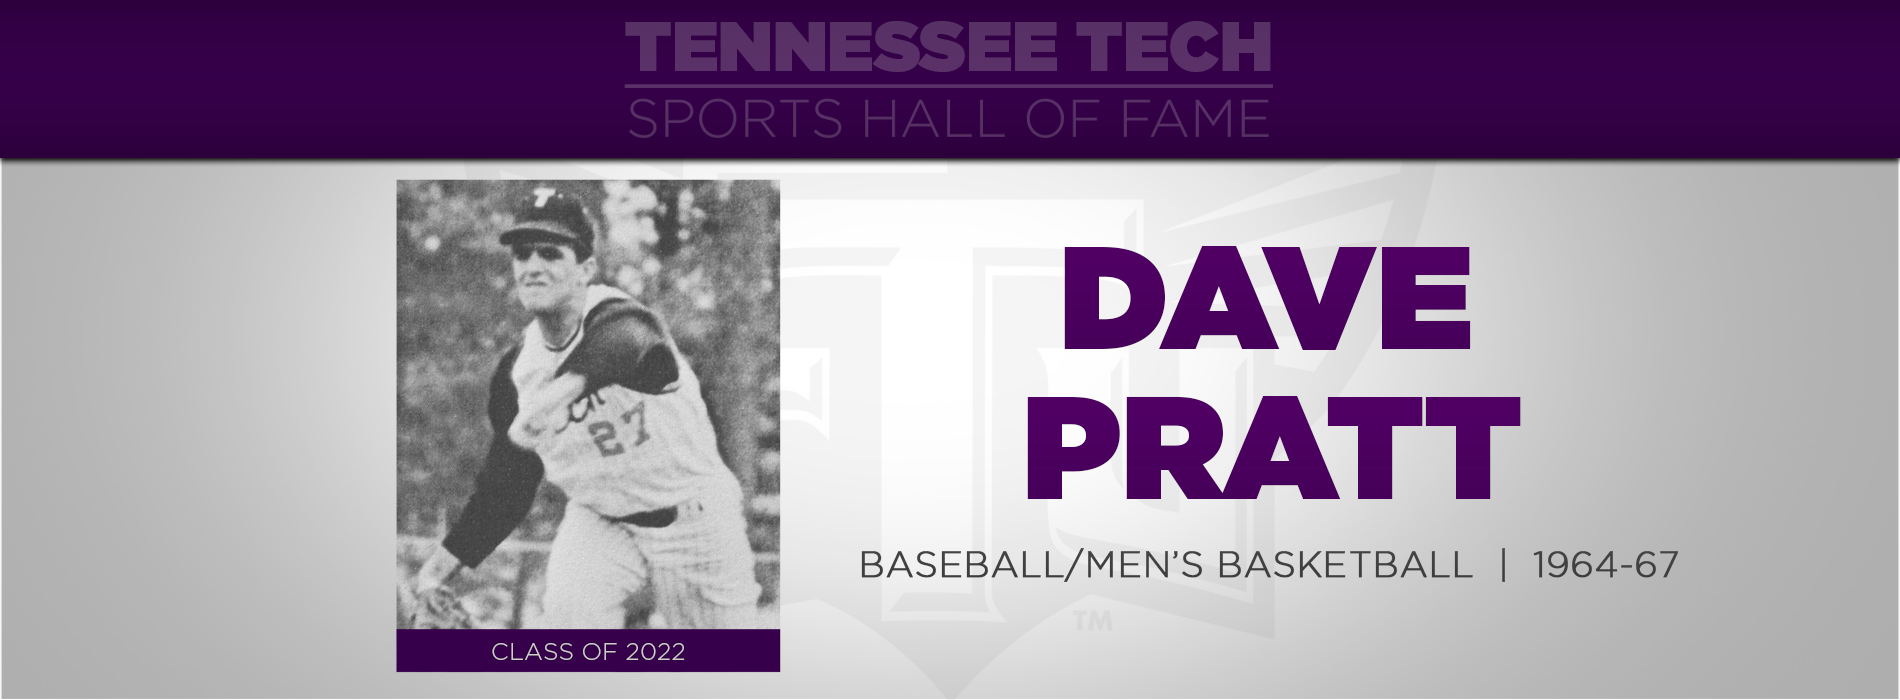 Pratt to be inducted into TTU Sports Hall of Fame Friday, Nov. 4